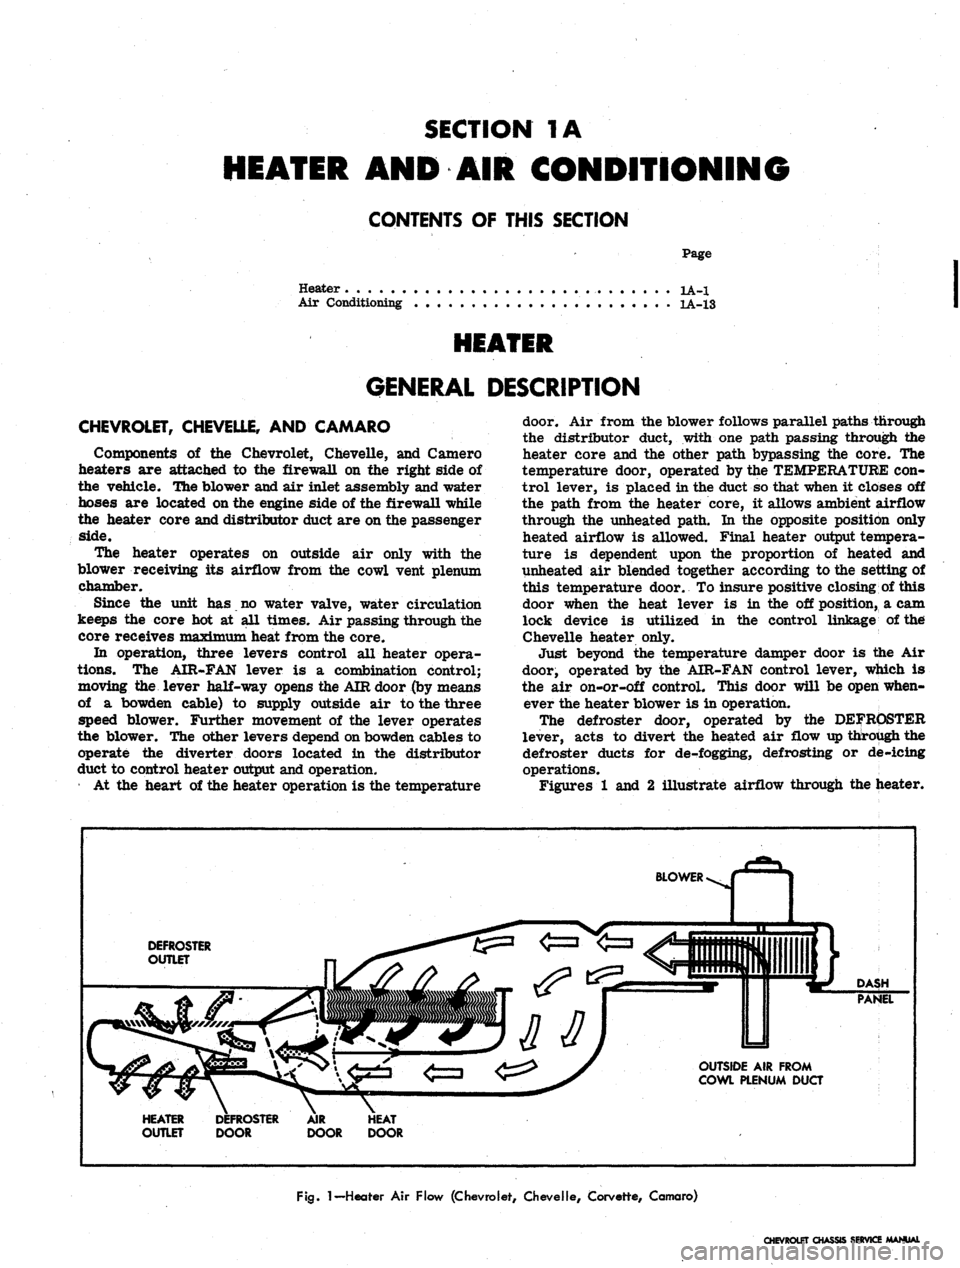 CHEVROLET CAMARO 1967 1.G Chassis User Guide 
SECTION
 1A

HEATER
 AND AIR
 CONDITIONING

CONTENTS
 OF
 THIS SECTION

Heater

Air Conditioning 
Page

1A-1

1A-13

HEATER

GENERAL DESCRIPTION

CHEVROLET, CHEVELLE,
 AND
 CAMARO

Components
 of the